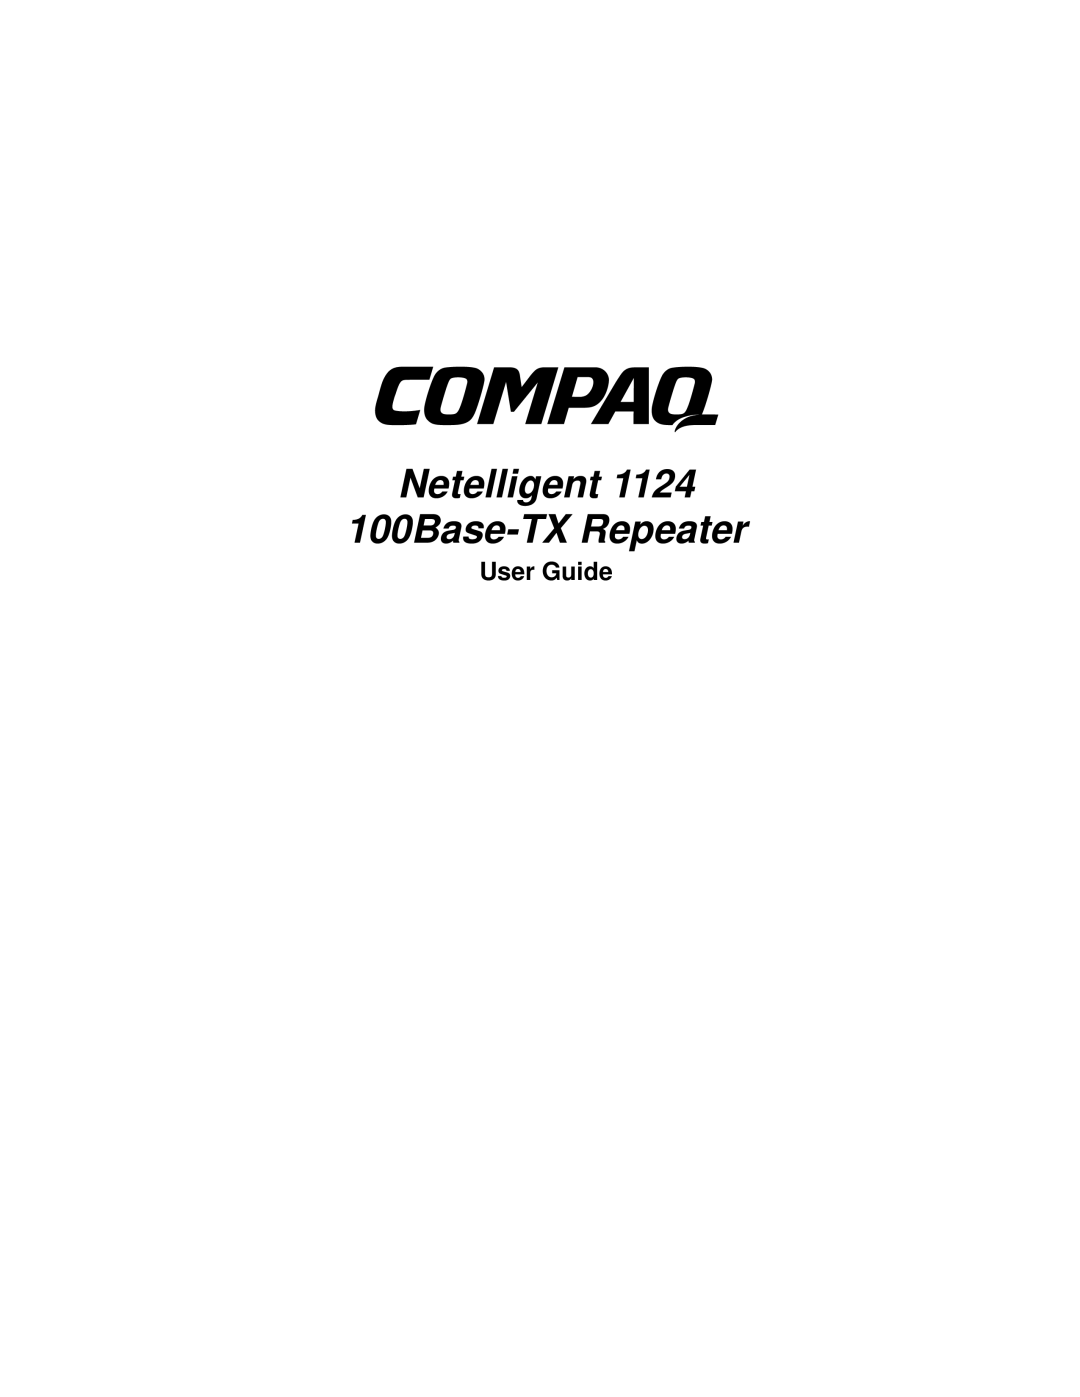 Compaq 1124 manual Netelligent 100Base-TX Repeater, User Guide 